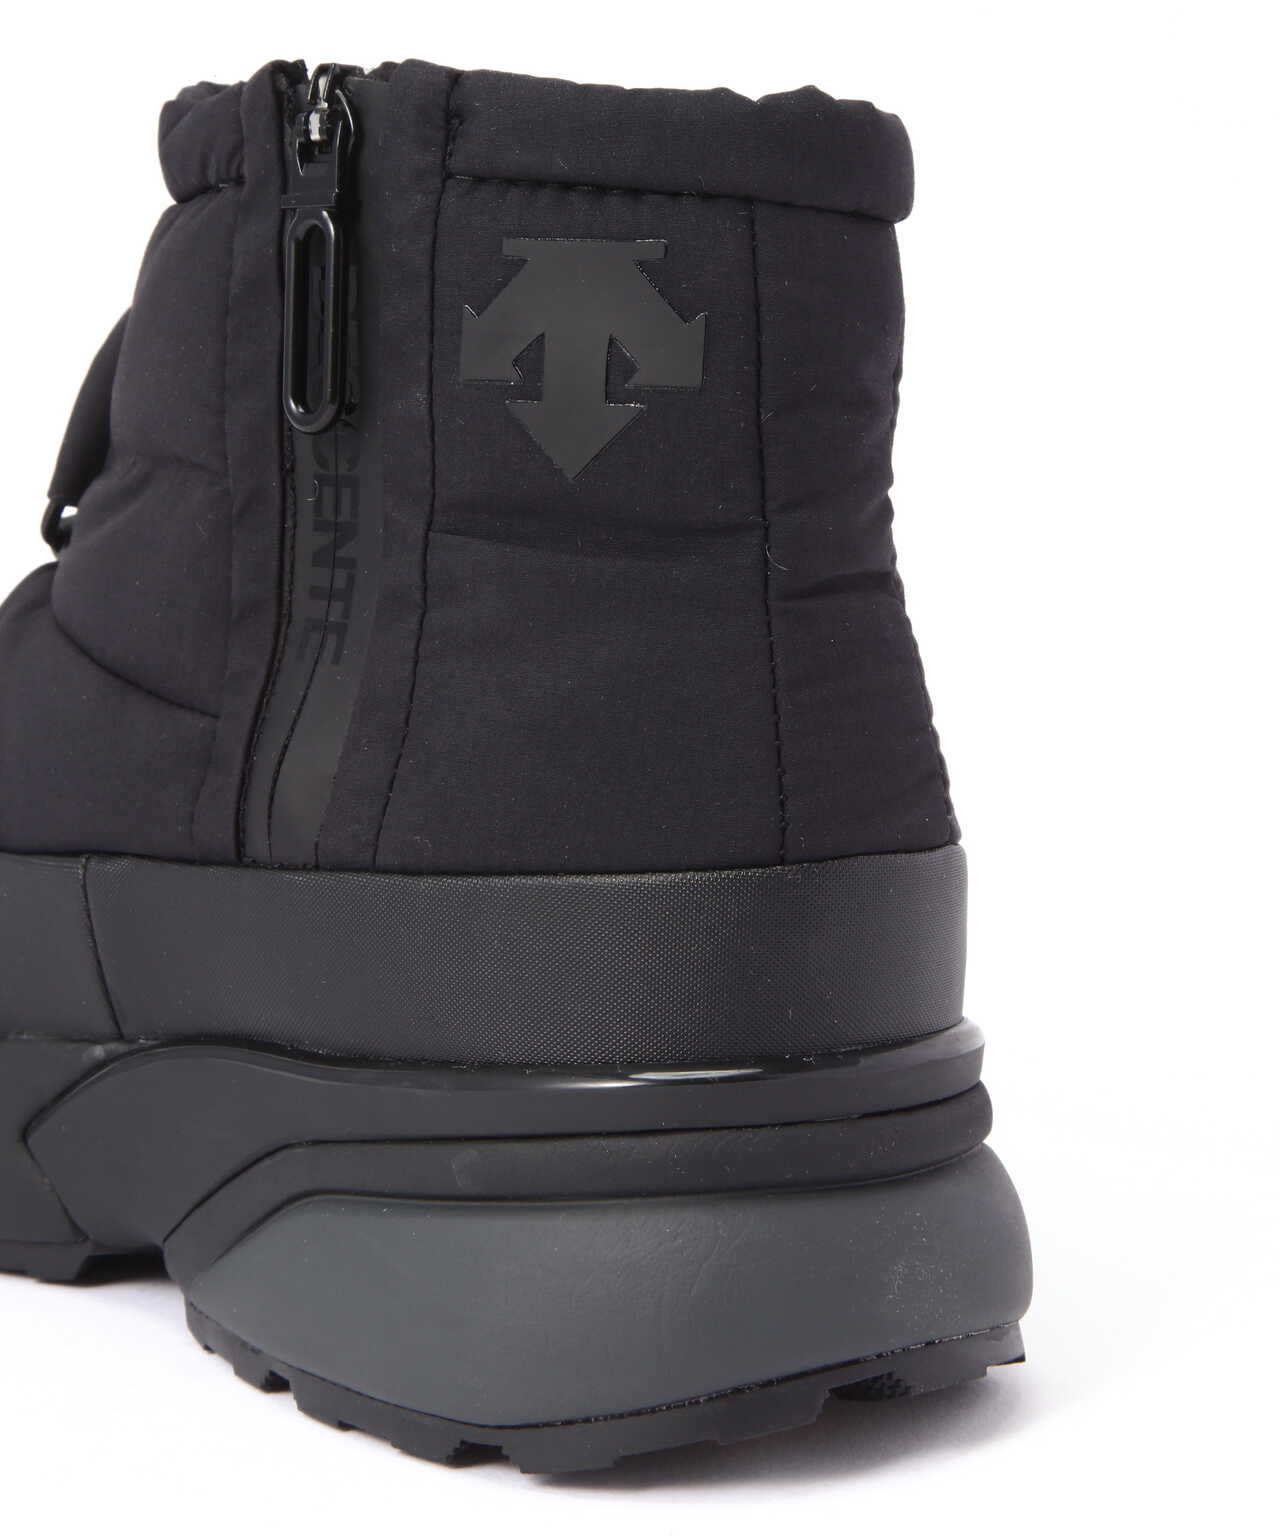 DESCENTE/デサント/ACTIVE WINTER BOOTS SHORT + / ウィンターブーツ